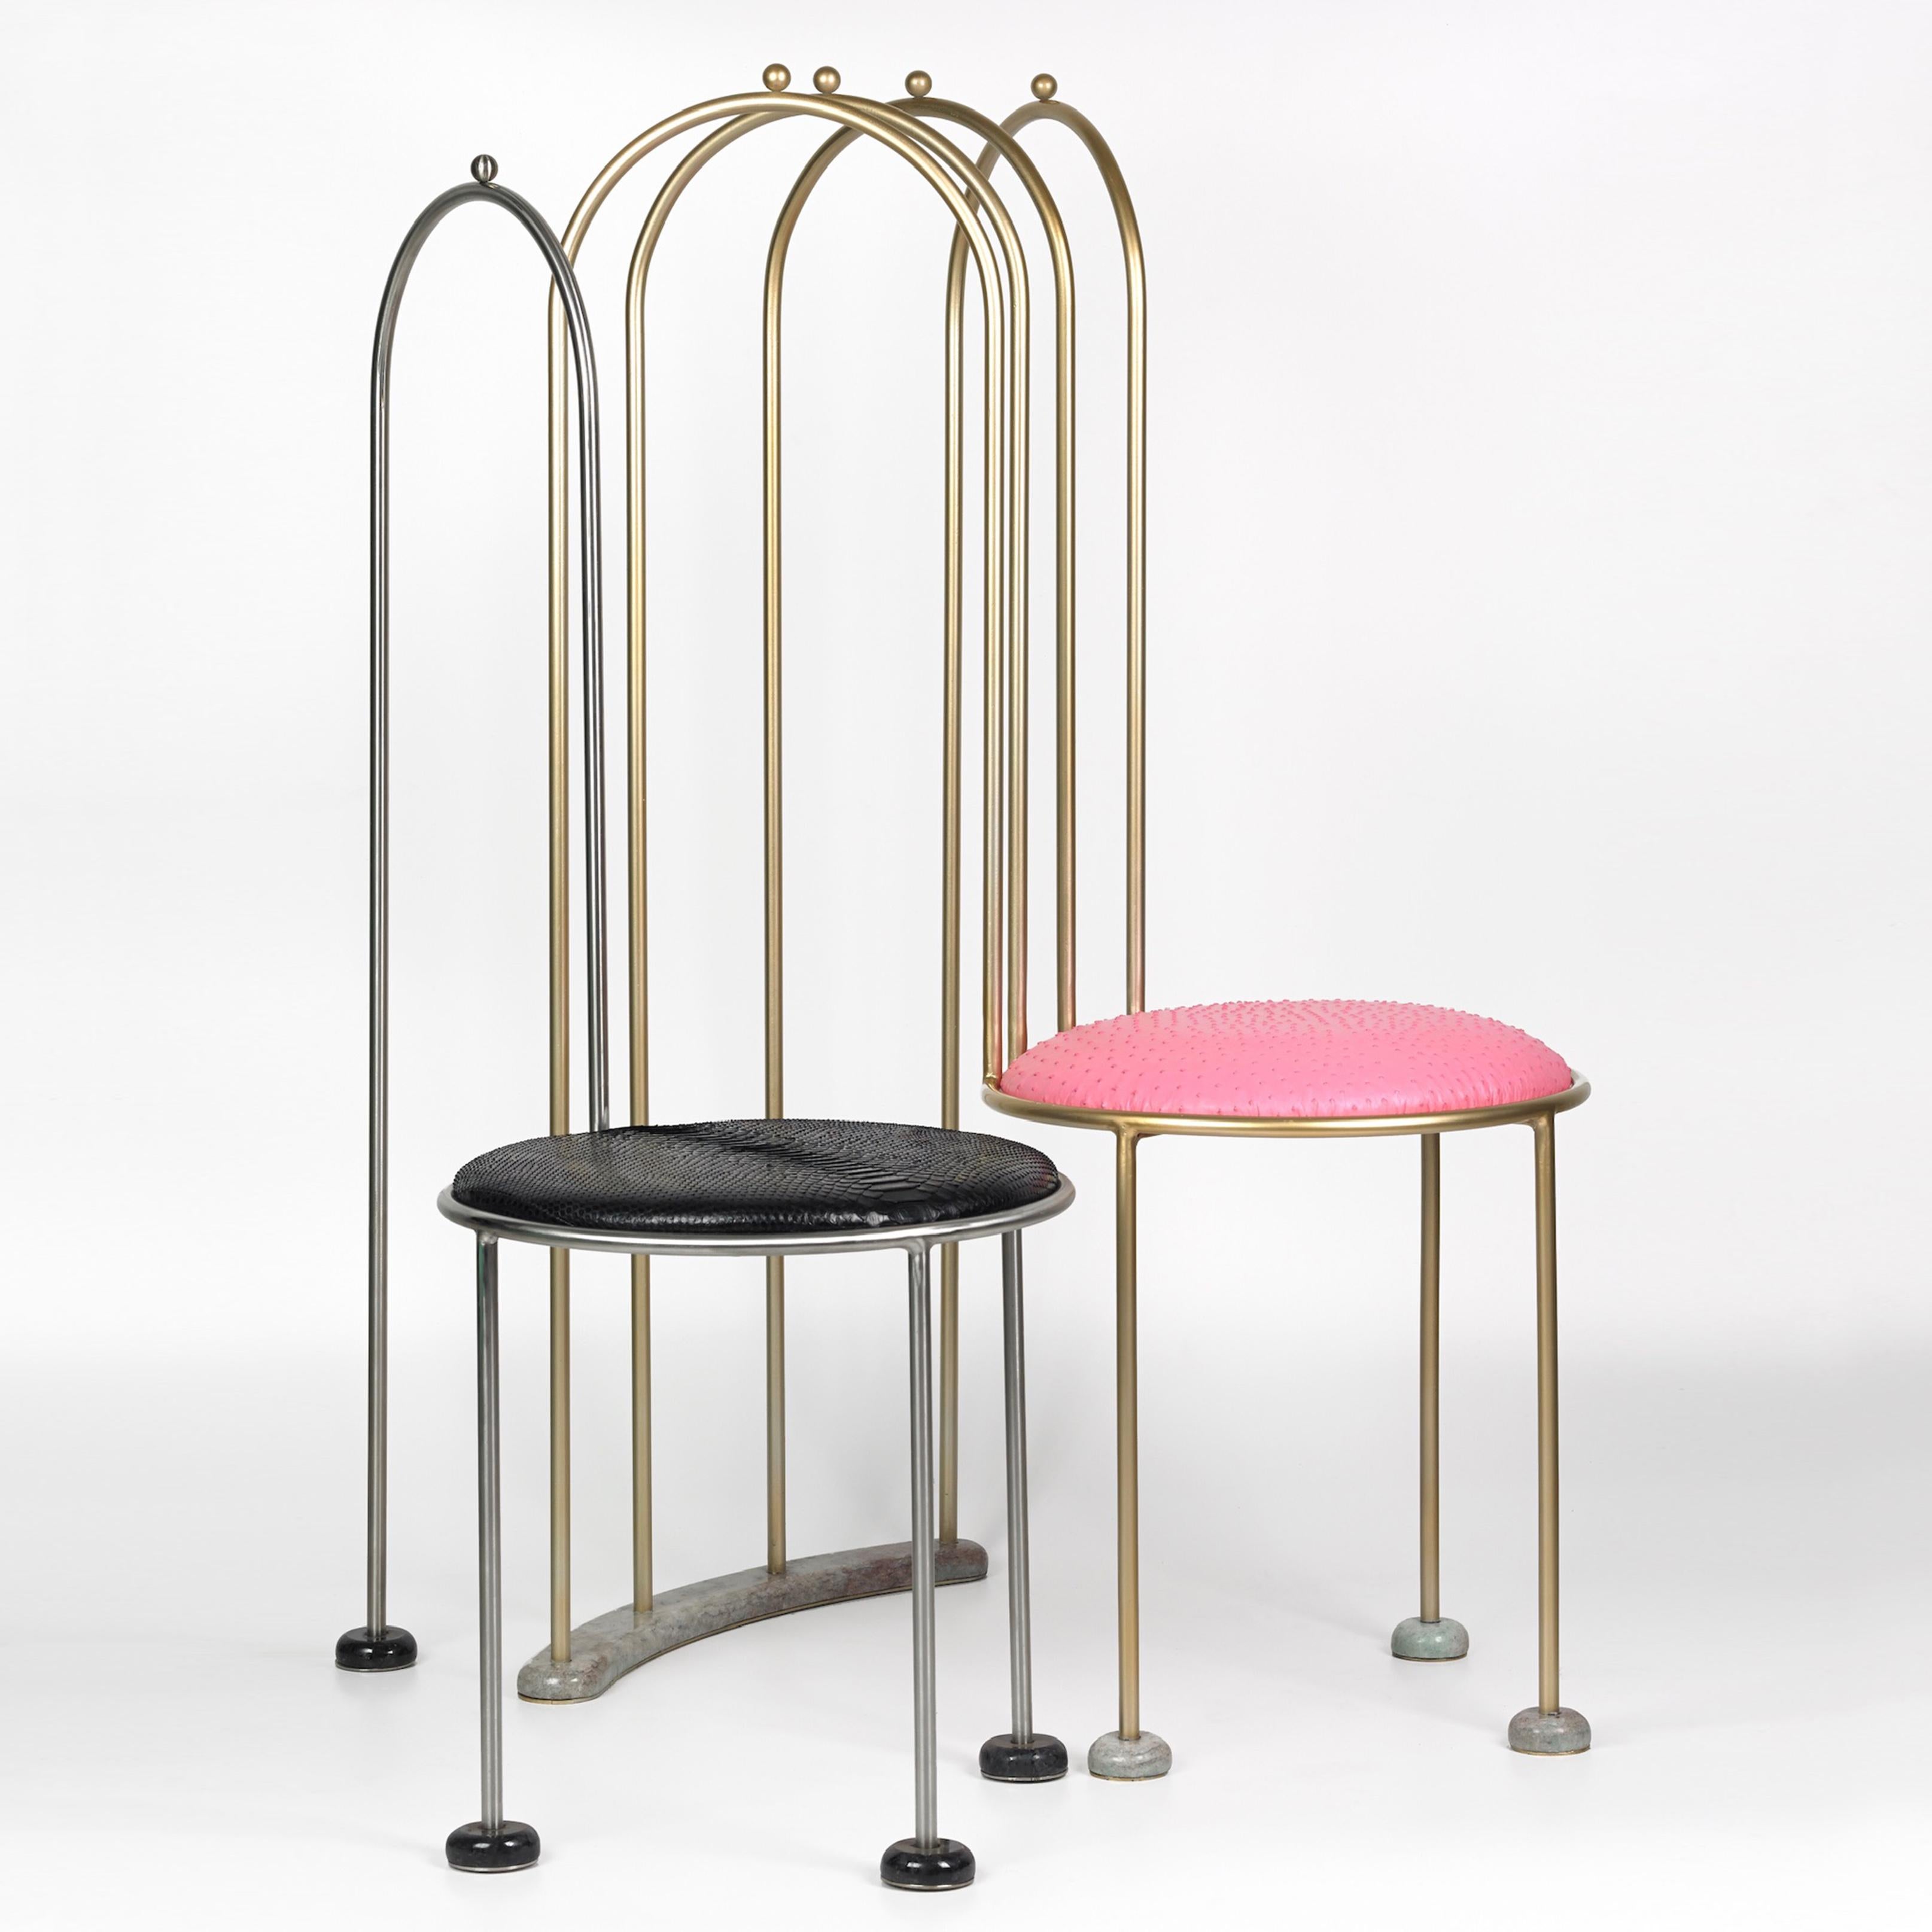 Contemporary Kiss the Architect ‘Dine on Me' 2016 Chair Modern Art Brass Leather Side Pink